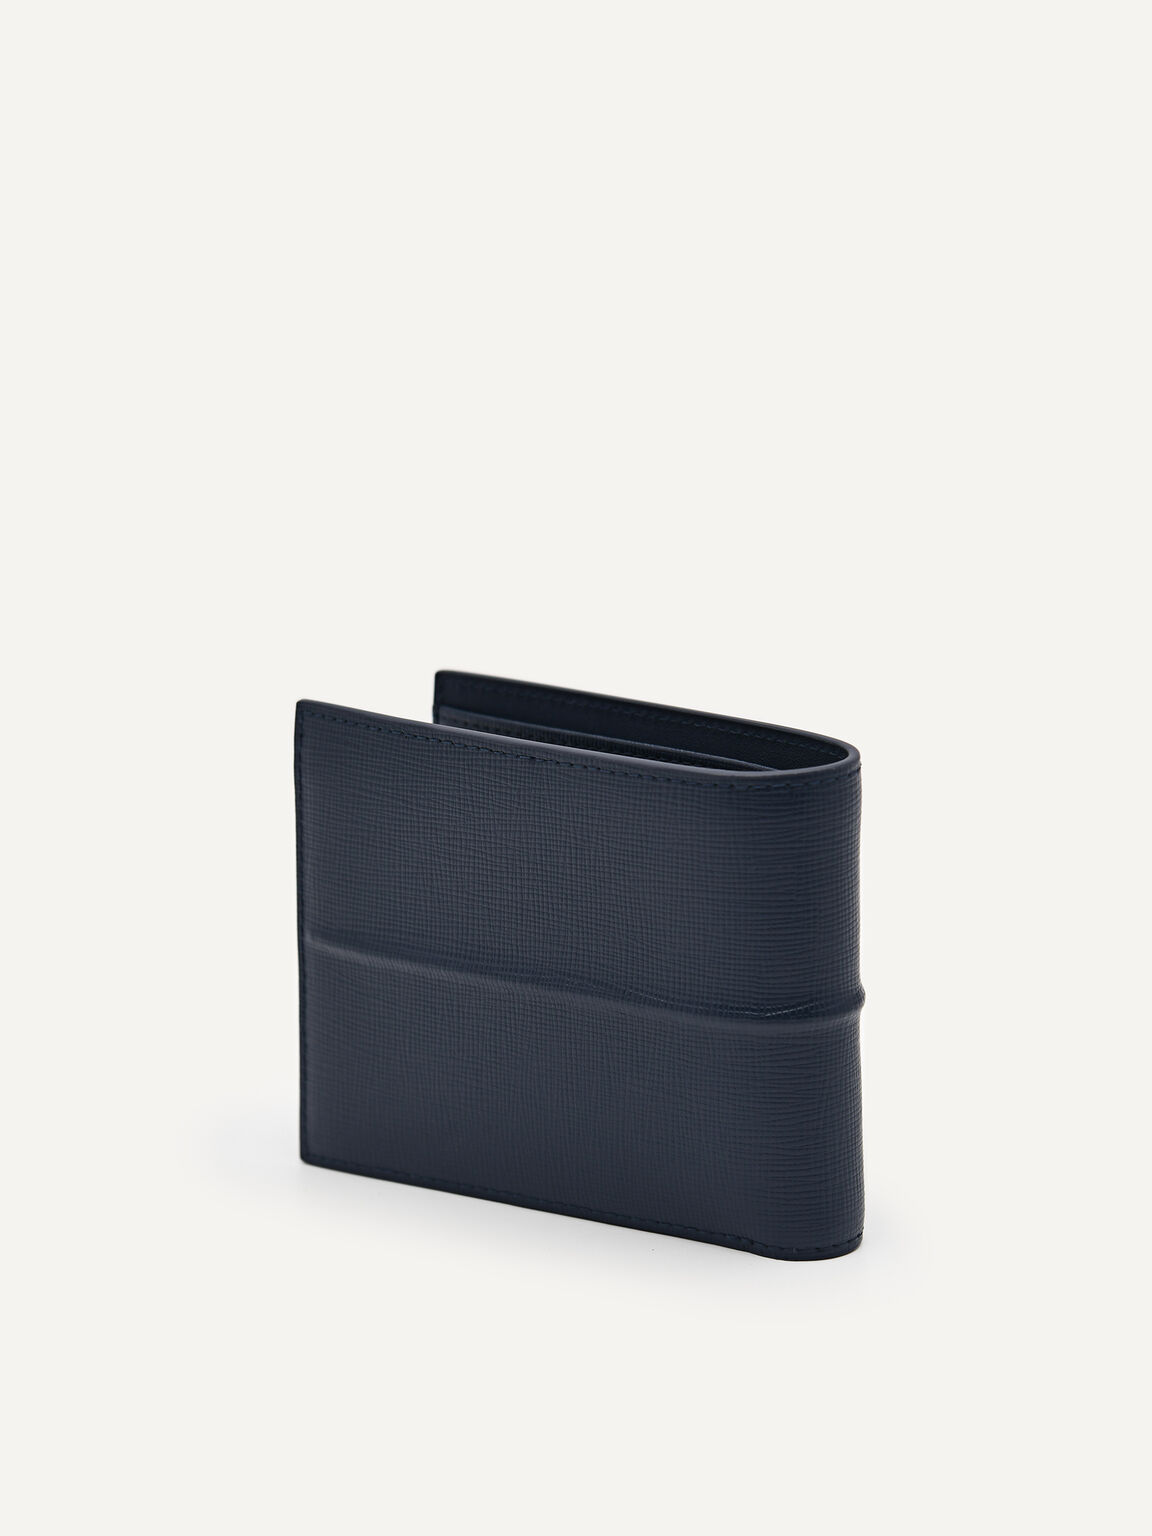 Embossed Leather Bi-Fold Wallet with Insert, Navy, hi-res